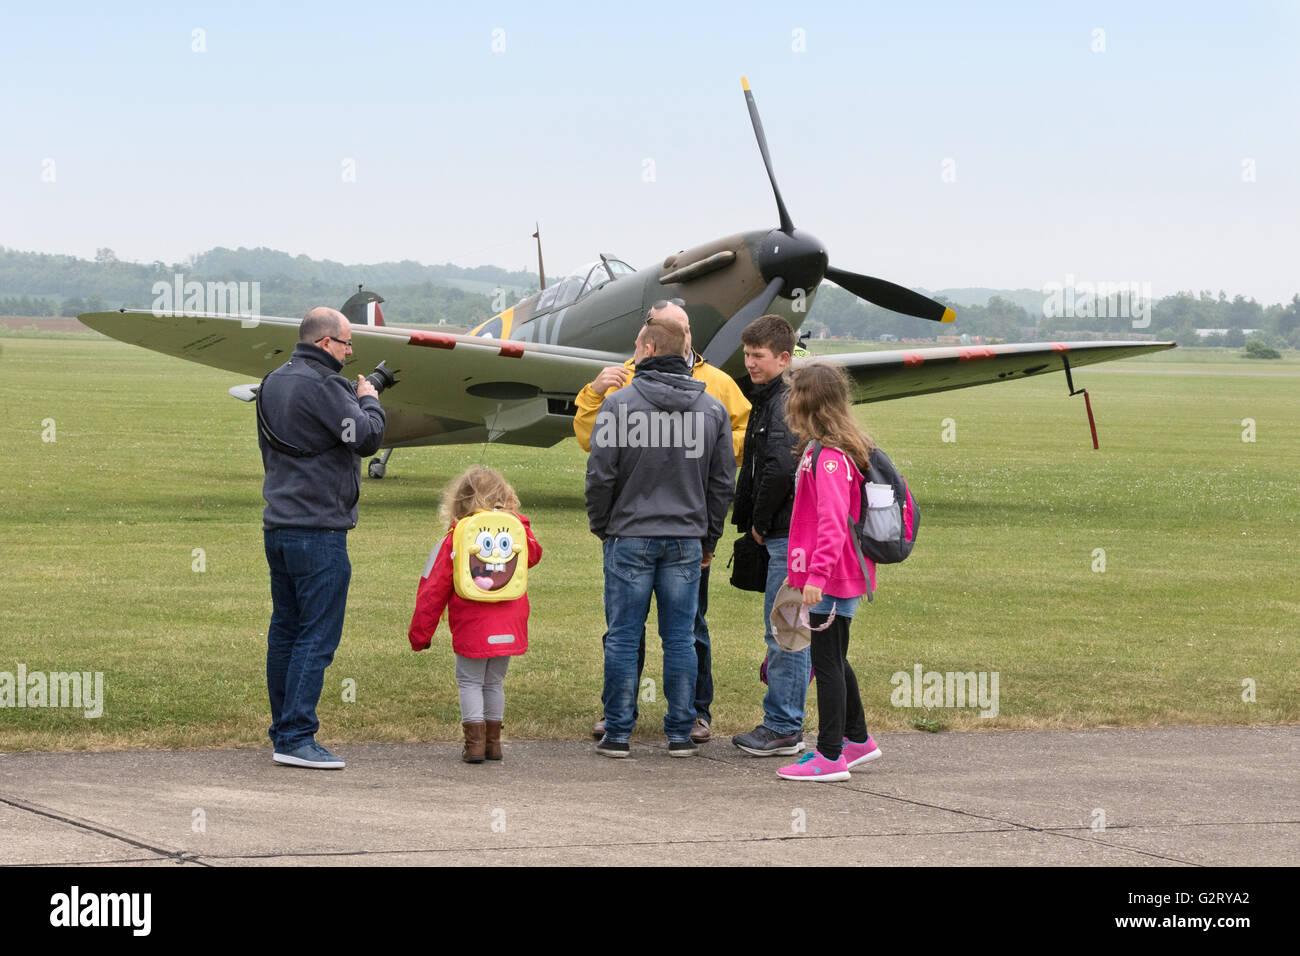 A family with children looking at a WW2 Spitfire plane at the Duxford Air Show, Imperial War Museum, Duxford IWM, Cambridgeshire UK Stock Photo